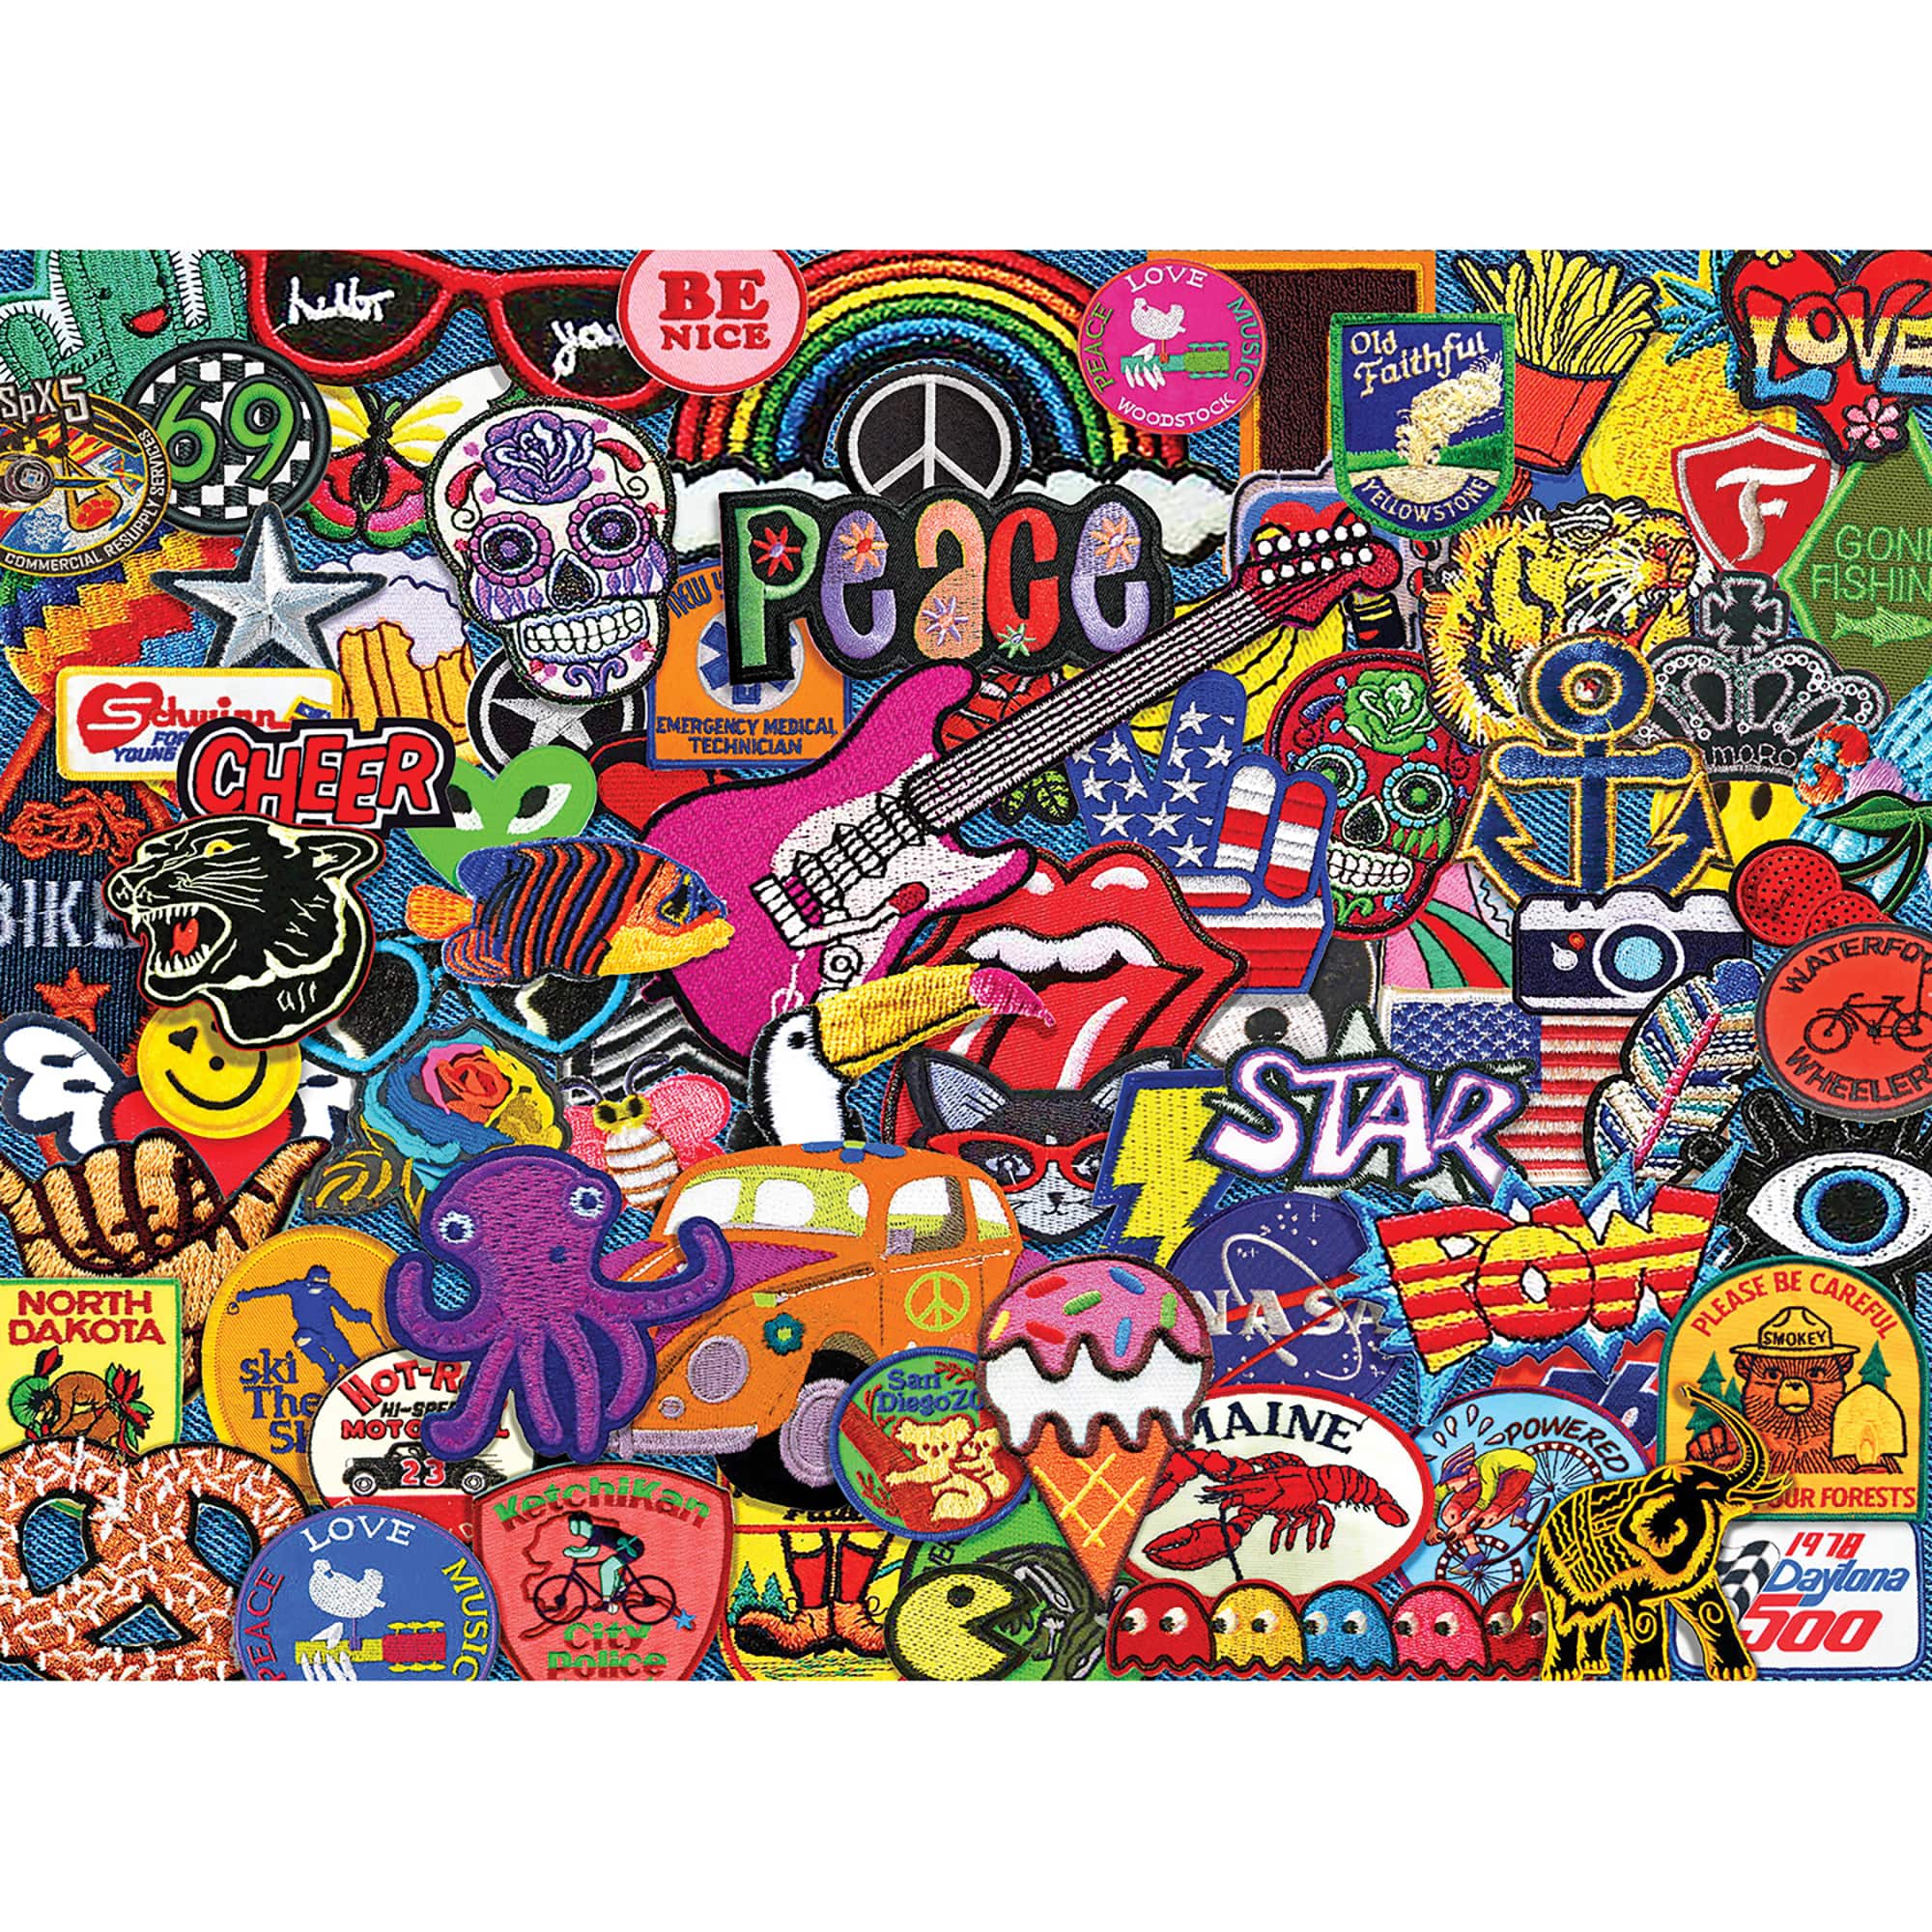 Patches of Fun 1,000 Piece Puzzle